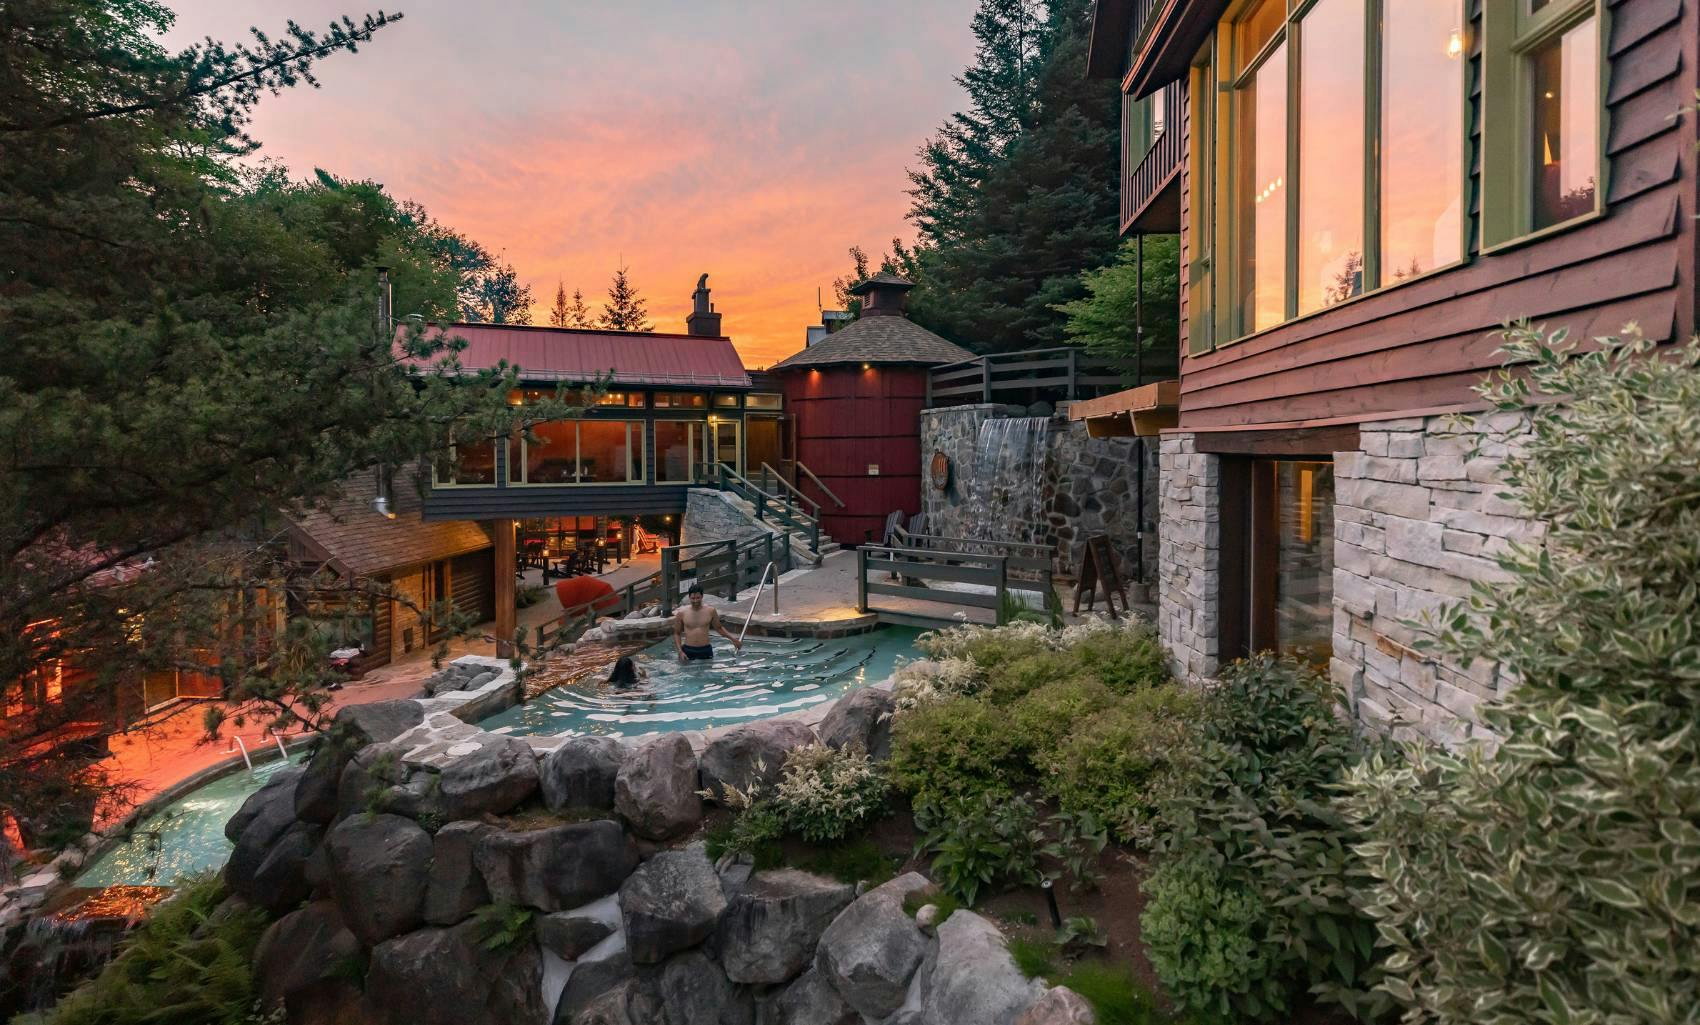 Enjoy a sunset experience at Scandinave Spa